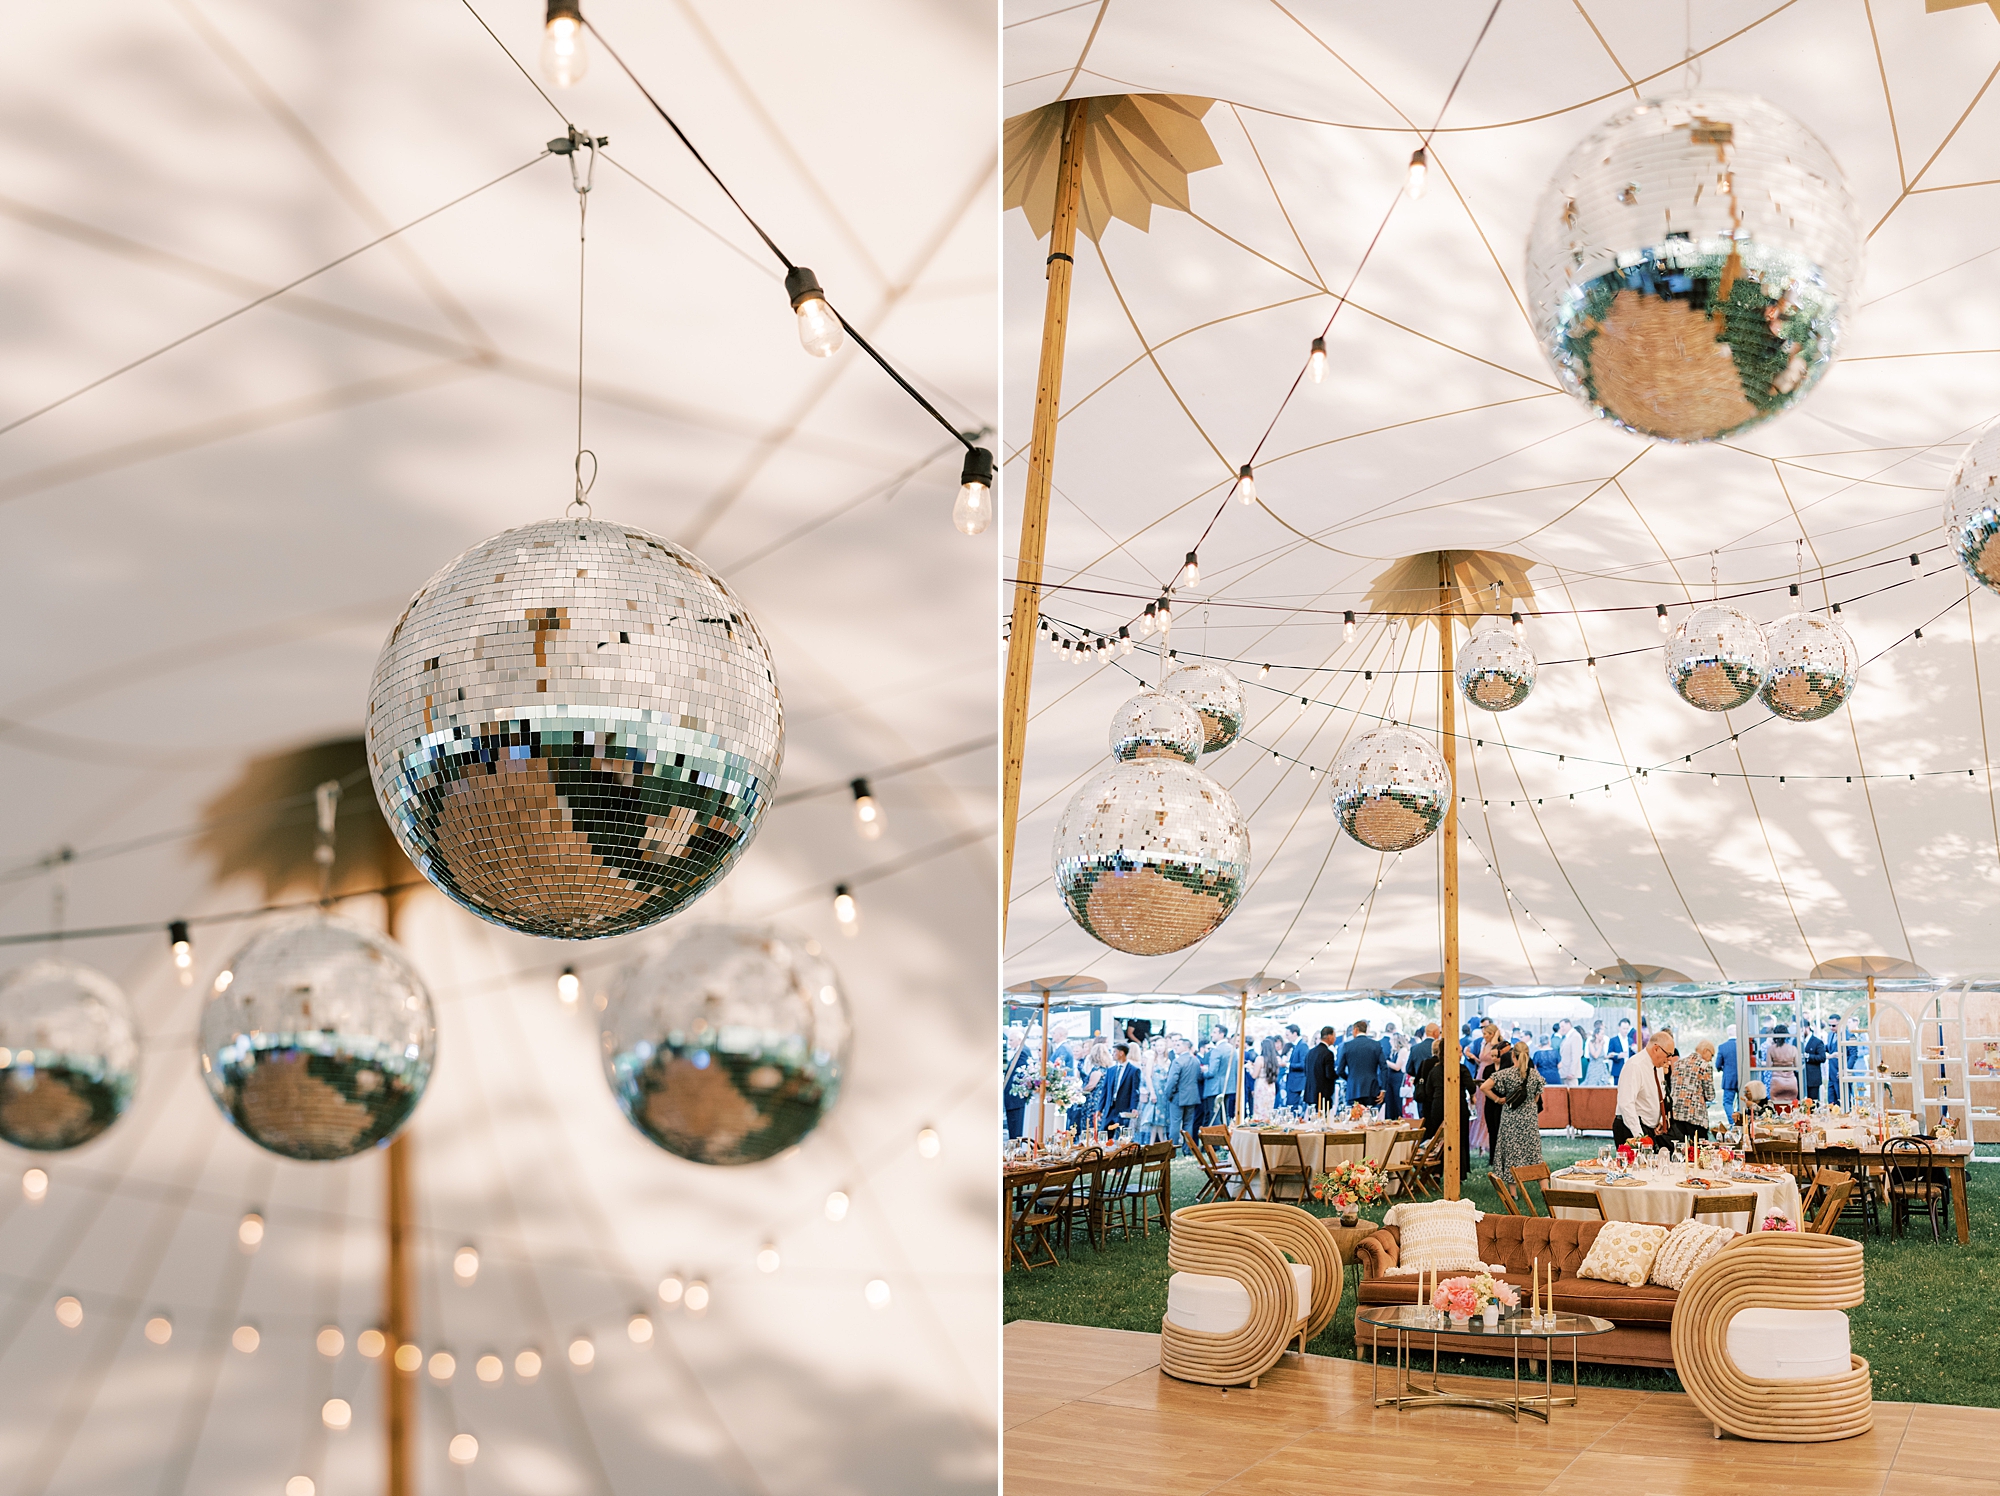 disco balls hang from tent for reception at Bowman's Hill Wildflower Preserve